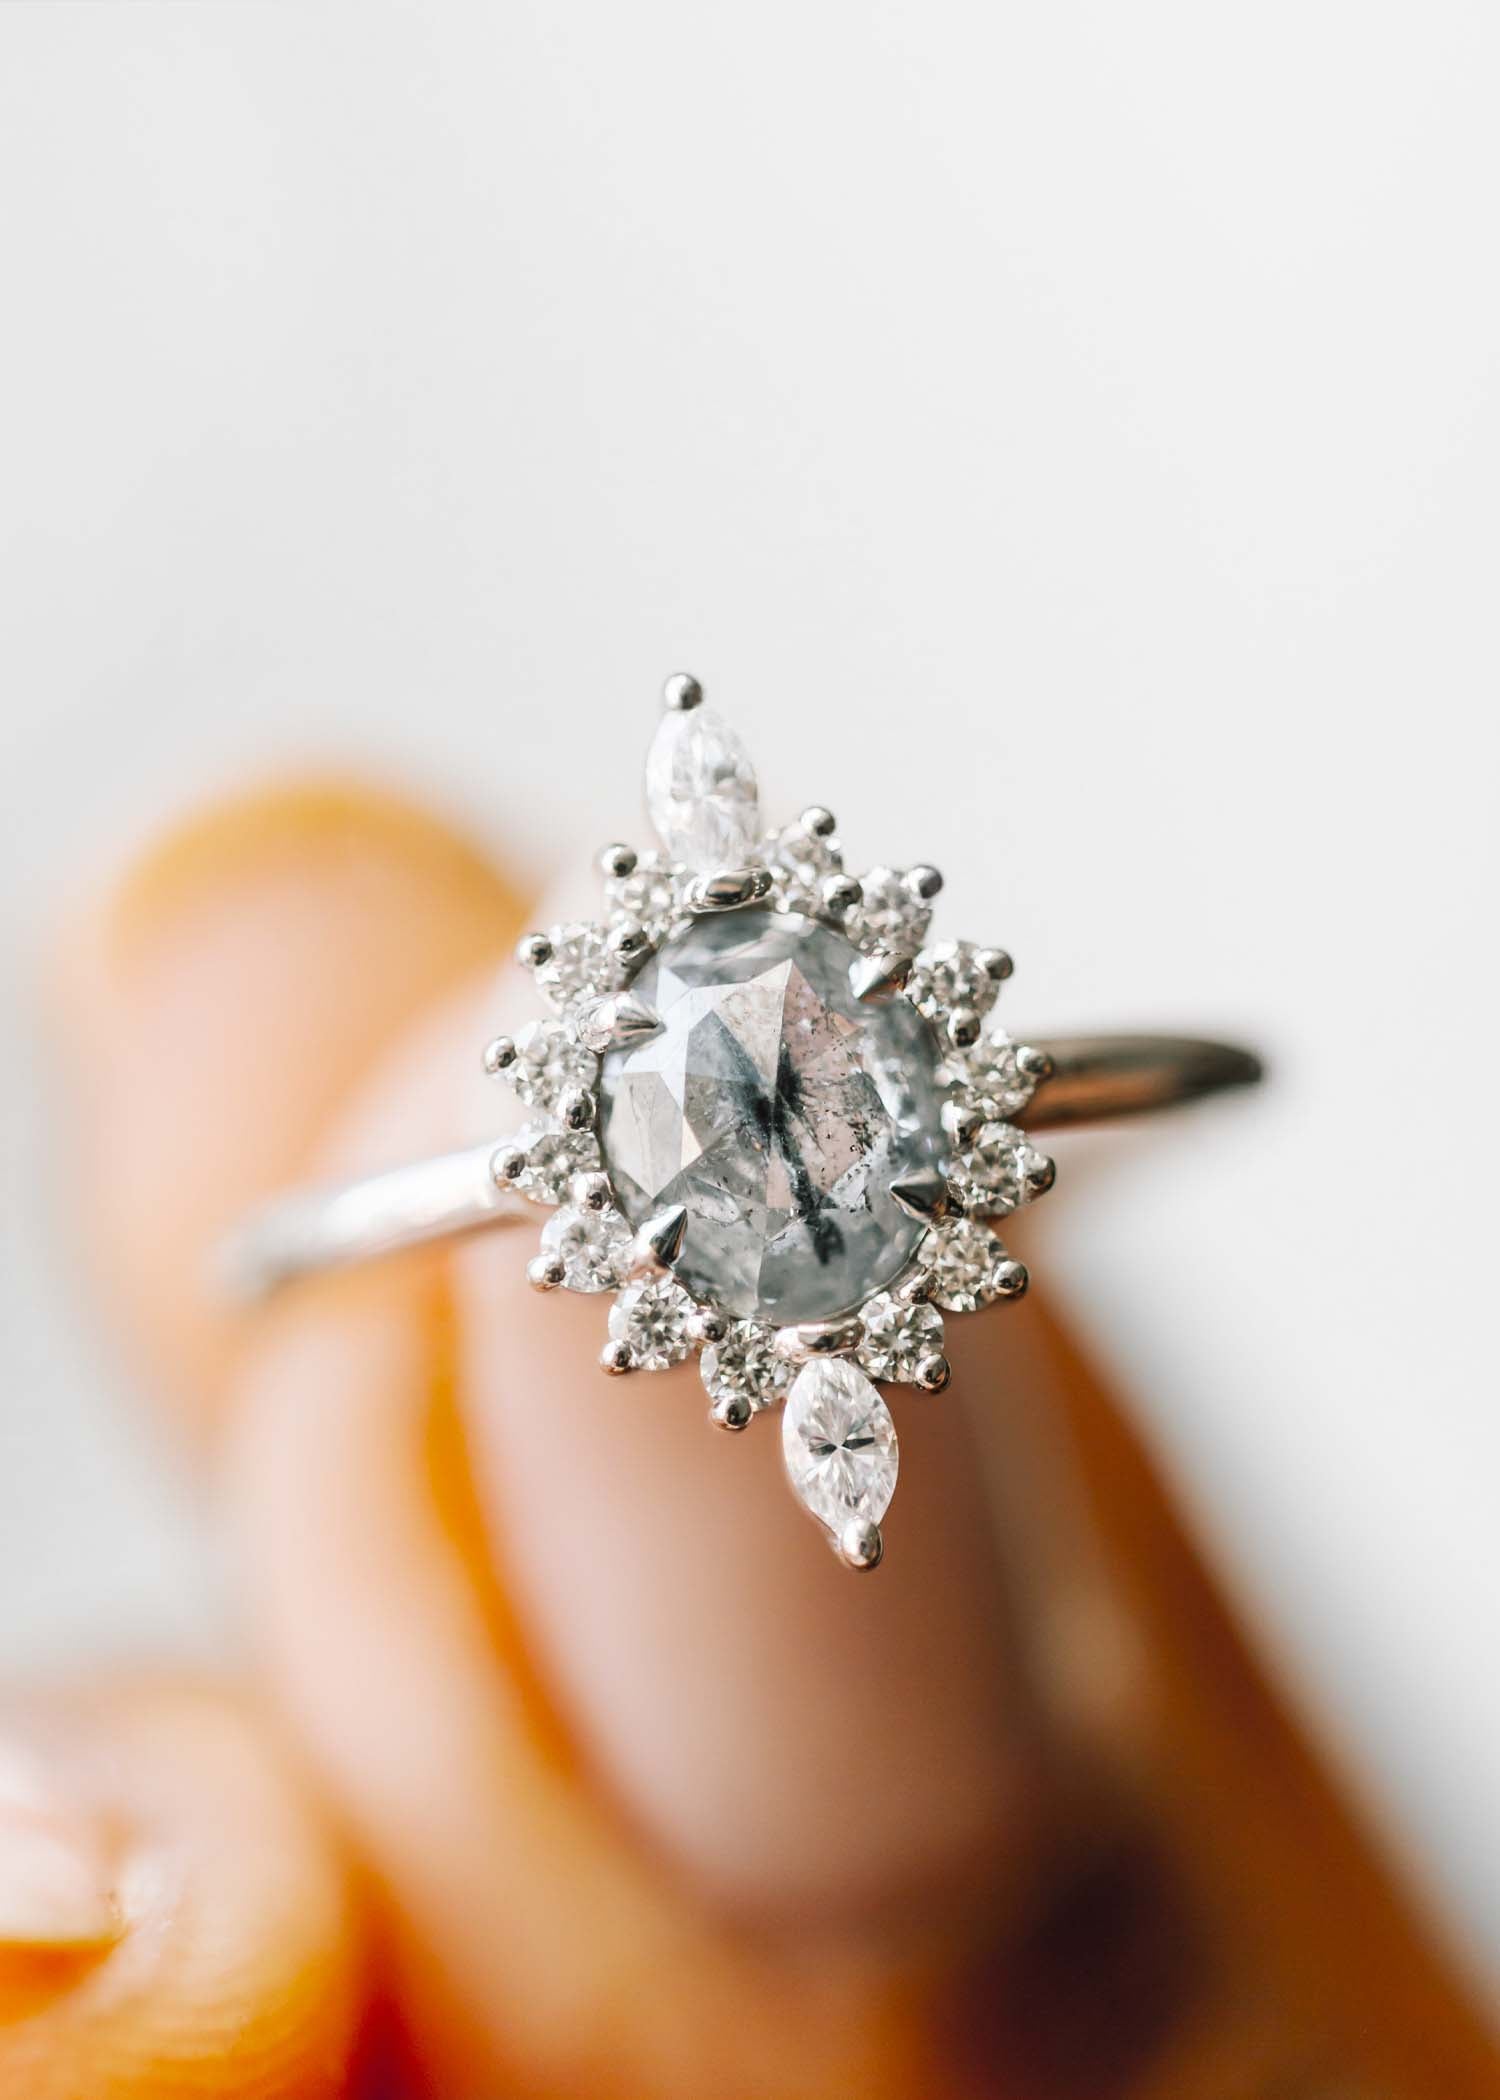 A close-up image of a unique engagement ring featuring an oval salt and pepper diamond at its center. The diamond is surrounded by a halo of sparkling white diamonds and accented with marquise-cut diamonds, creating a floral-inspired design. Set in a white gold band, this artisanal ring showcases the striking contrast and natural beauty of the salt and pepper diamond. Perfect for those seeking distinctive, non-traditional engagement rings.